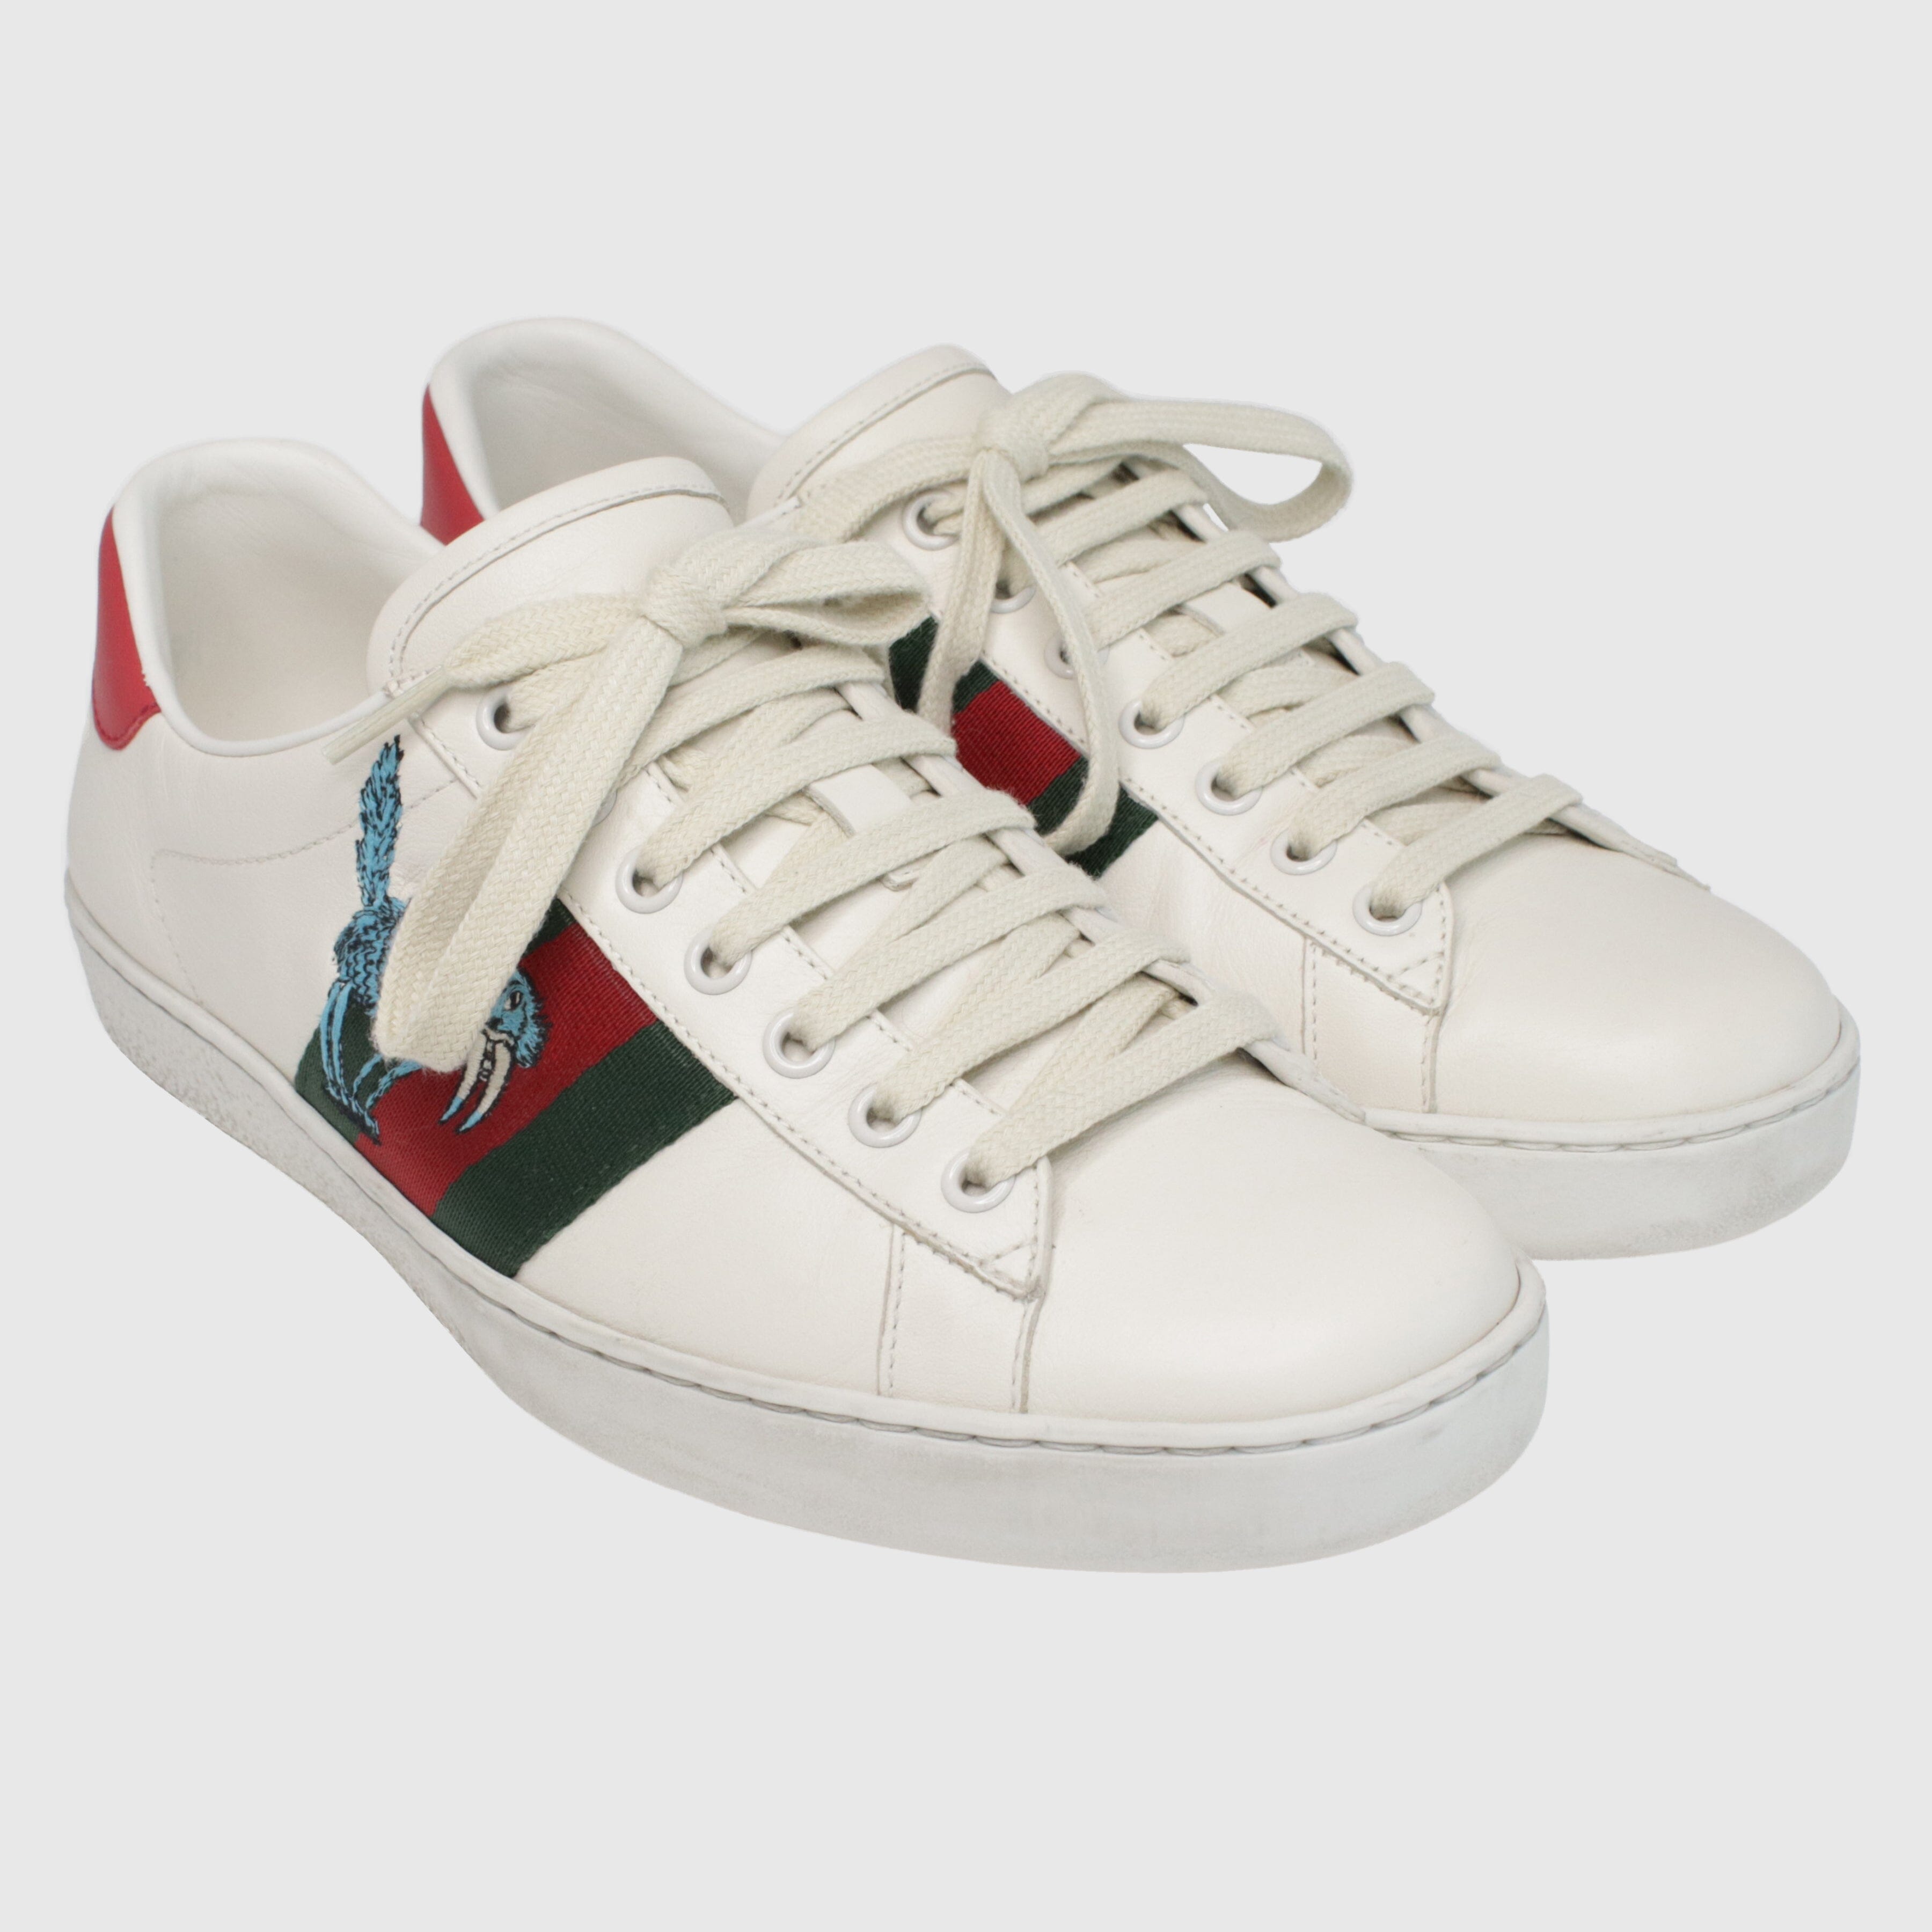 White/Red Web Stripe Ace Creature Embroidered Low Top Sneakers